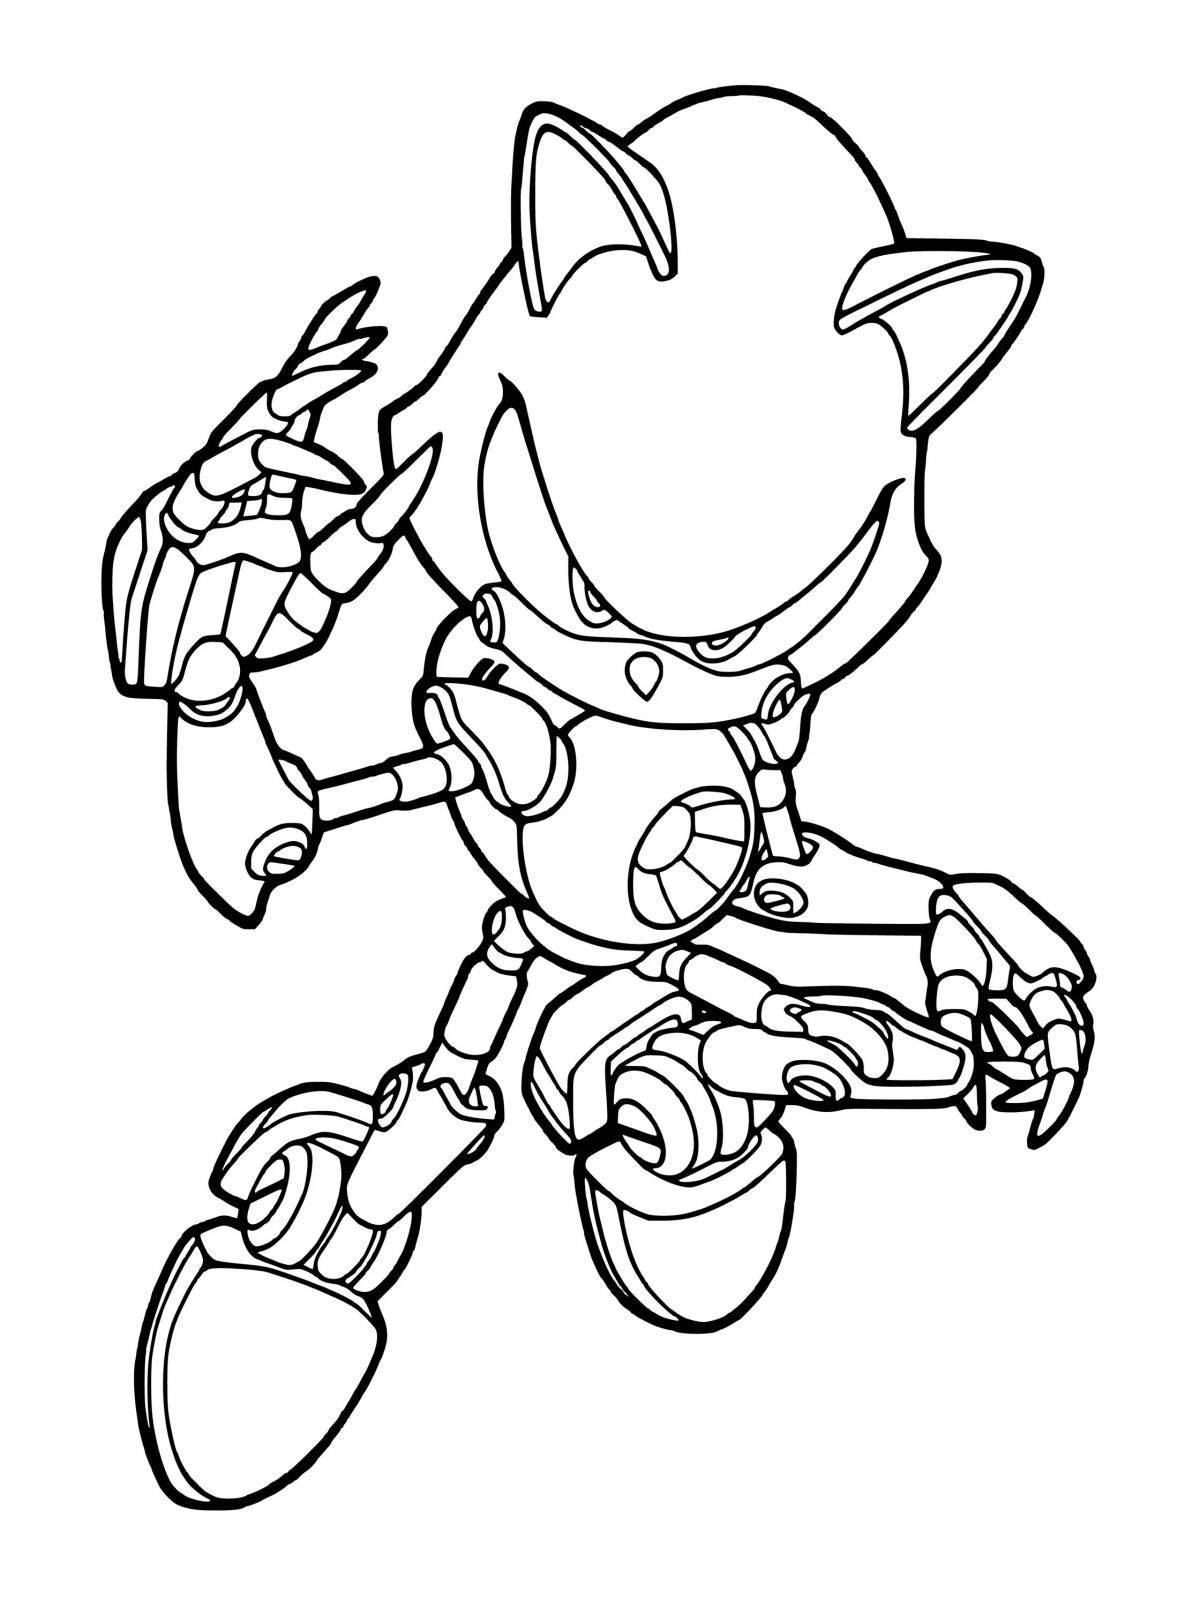 Humorous coloring sonic all heroes